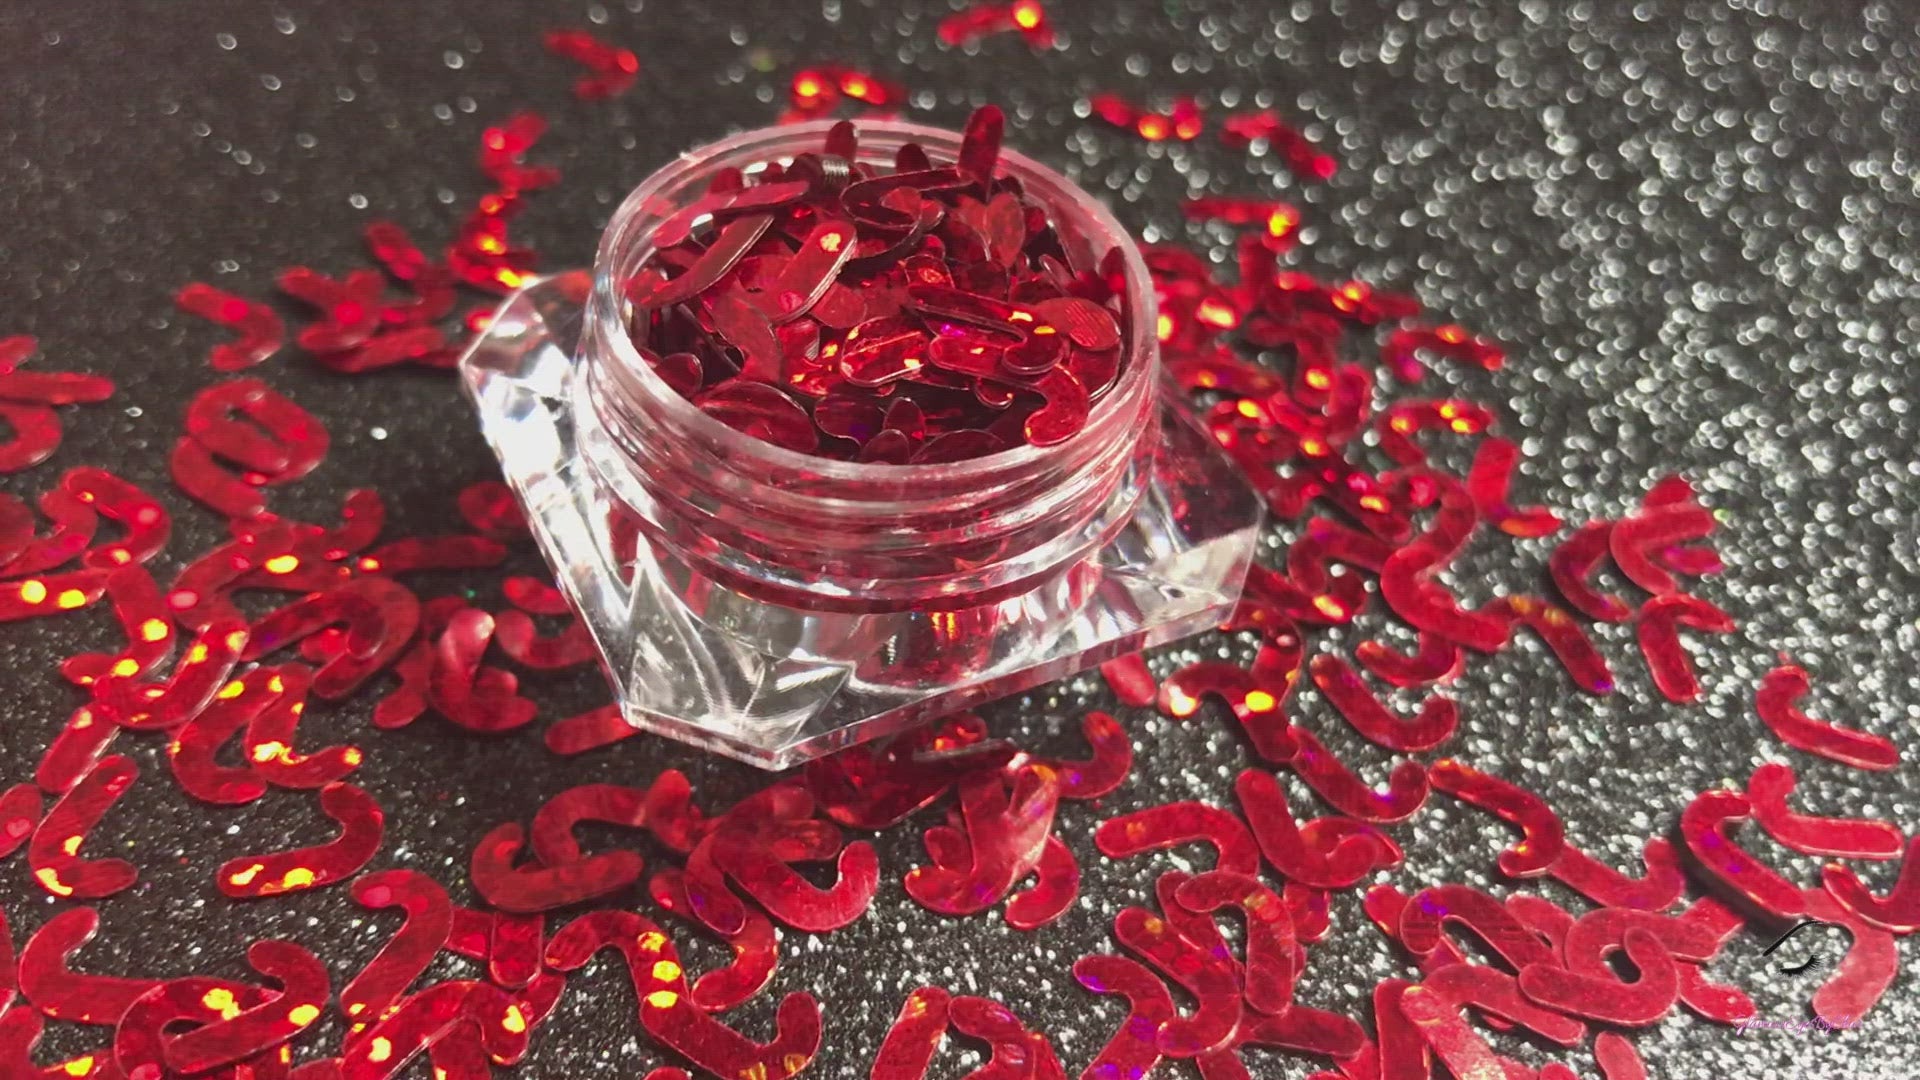 This glitter is called Red Candy Canes and is part of the holiday collection.  It consists of ruby red 7mm candy canes. Red Candy Canes can be used for body and nail art or DIY projects.  Comes in 5g jars only.